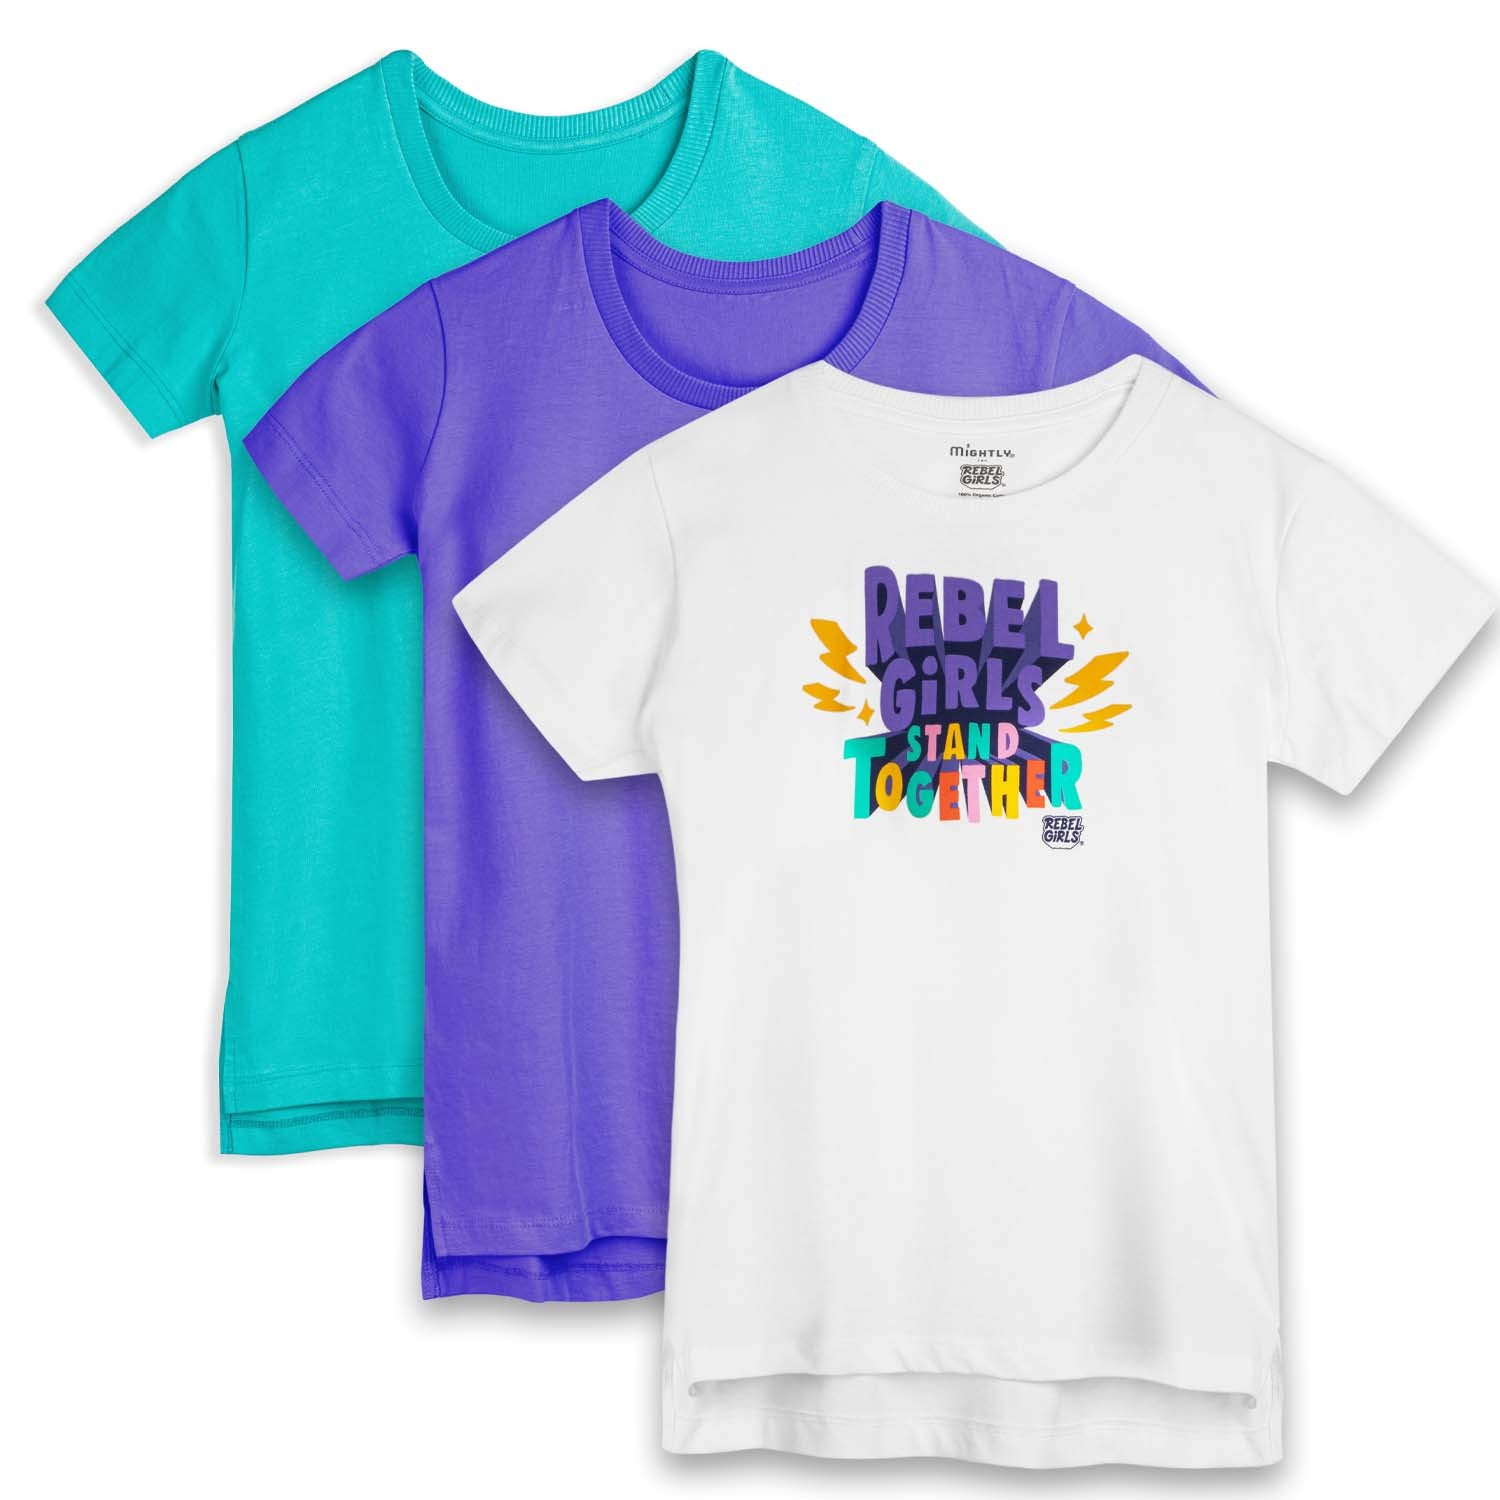 Organic Cotton Length - 3 Shirts Pack Extended Mightly - Kids T-Shirts